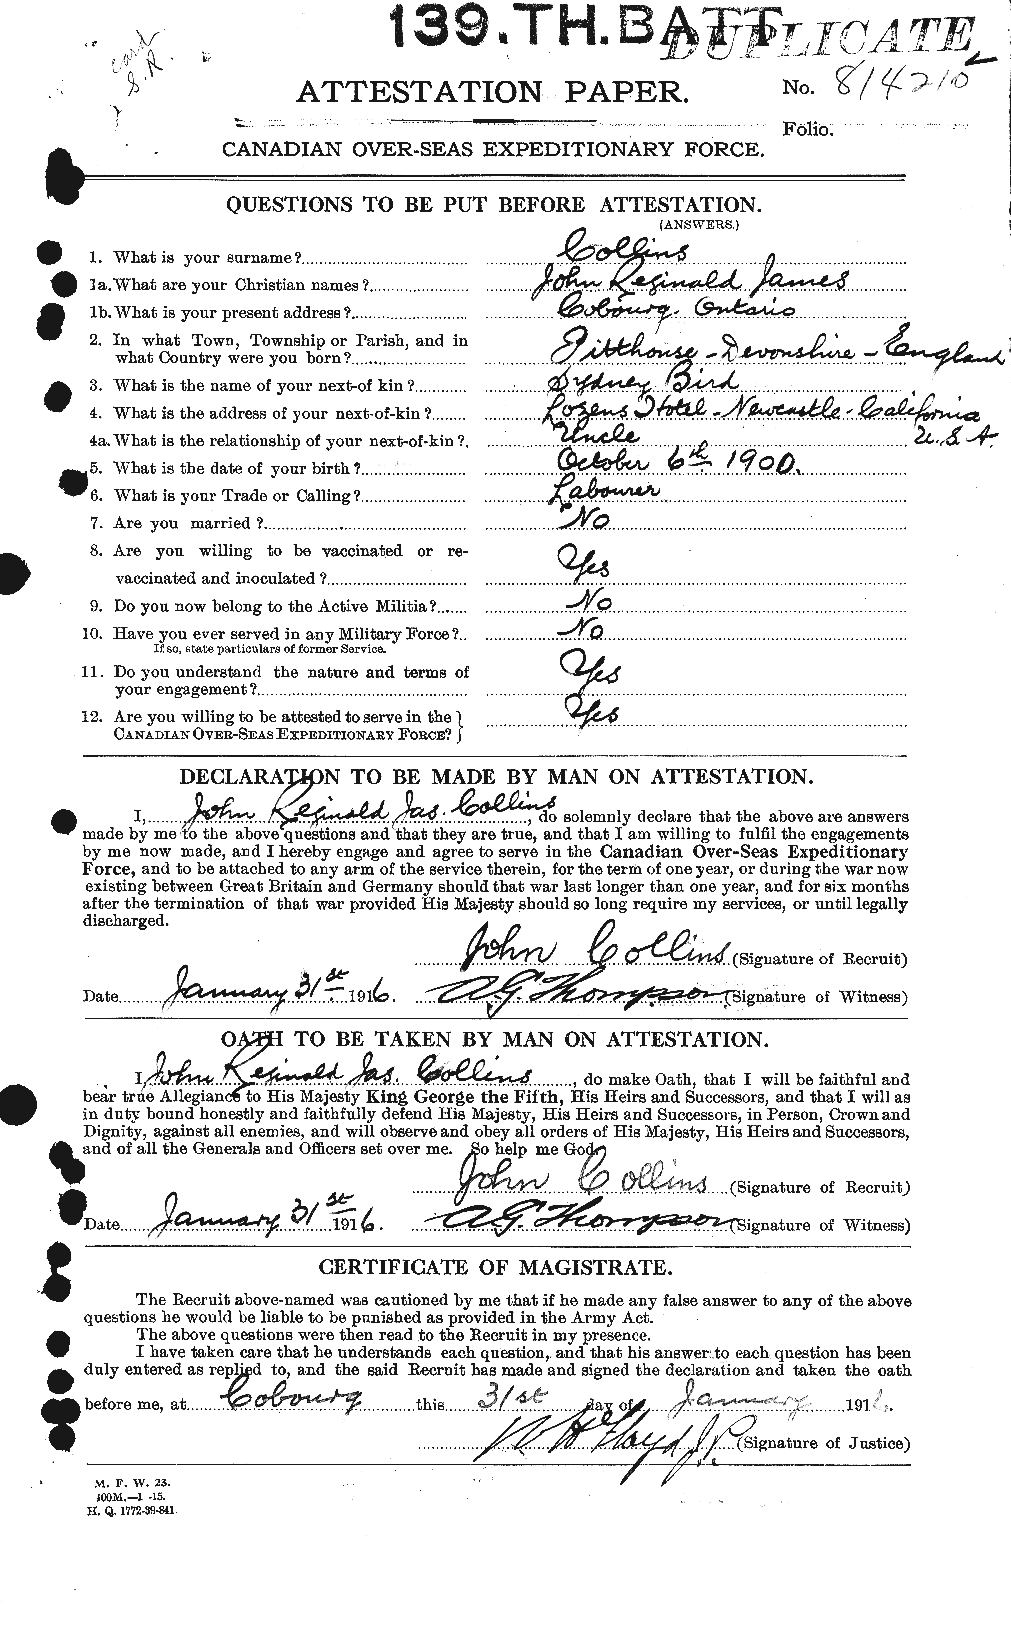 Personnel Records of the First World War - CEF 069538a